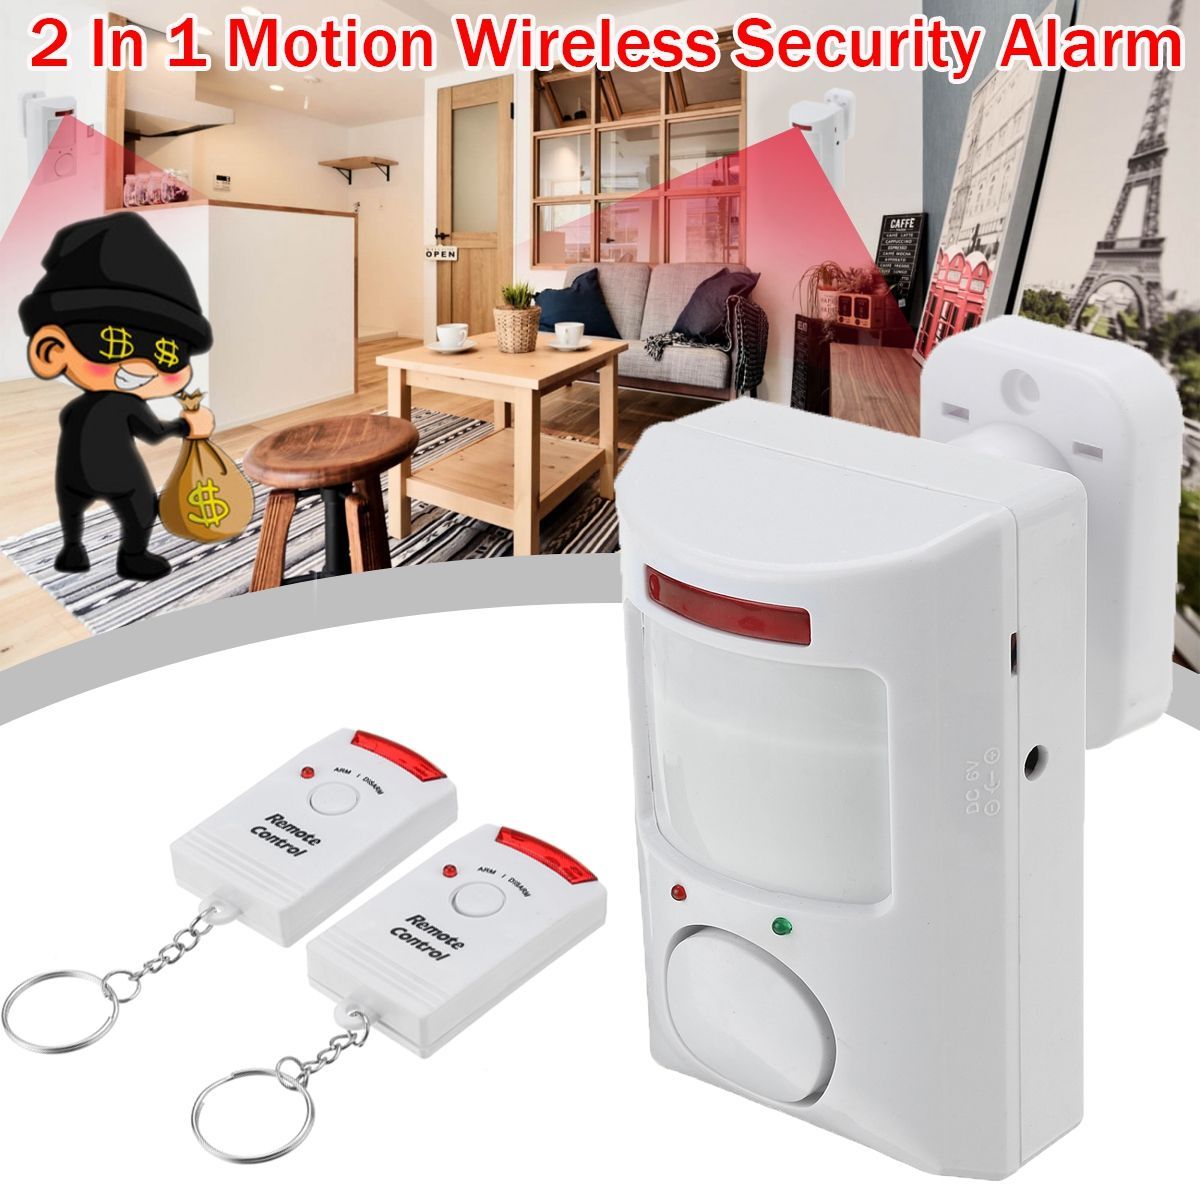 2-In-1-Motion-Wireless-Security-Alarm-and-Chime--Remote-ControlHolder-1741652